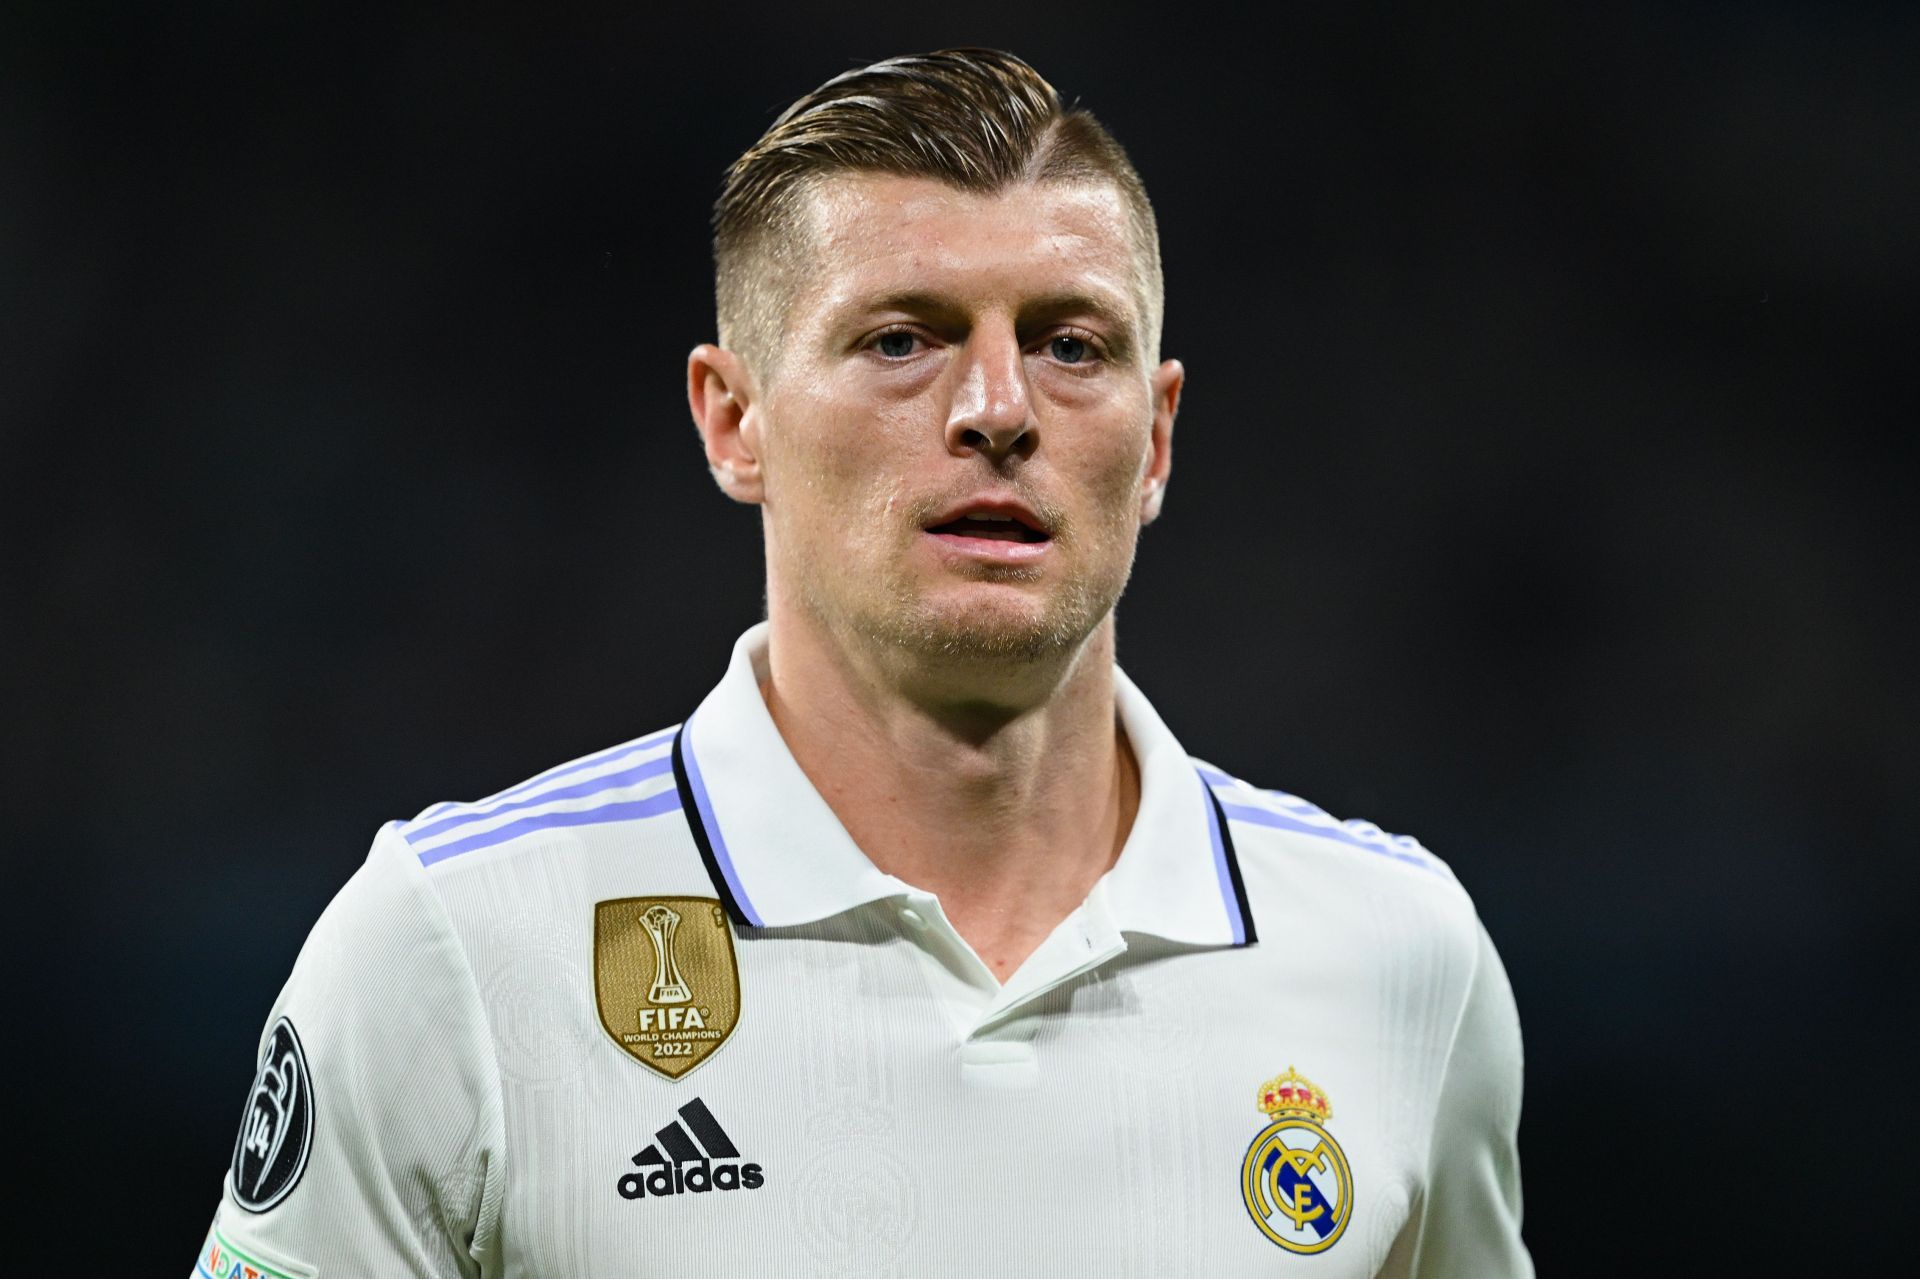 Toni Kroos&rsquo; contract expires next summer